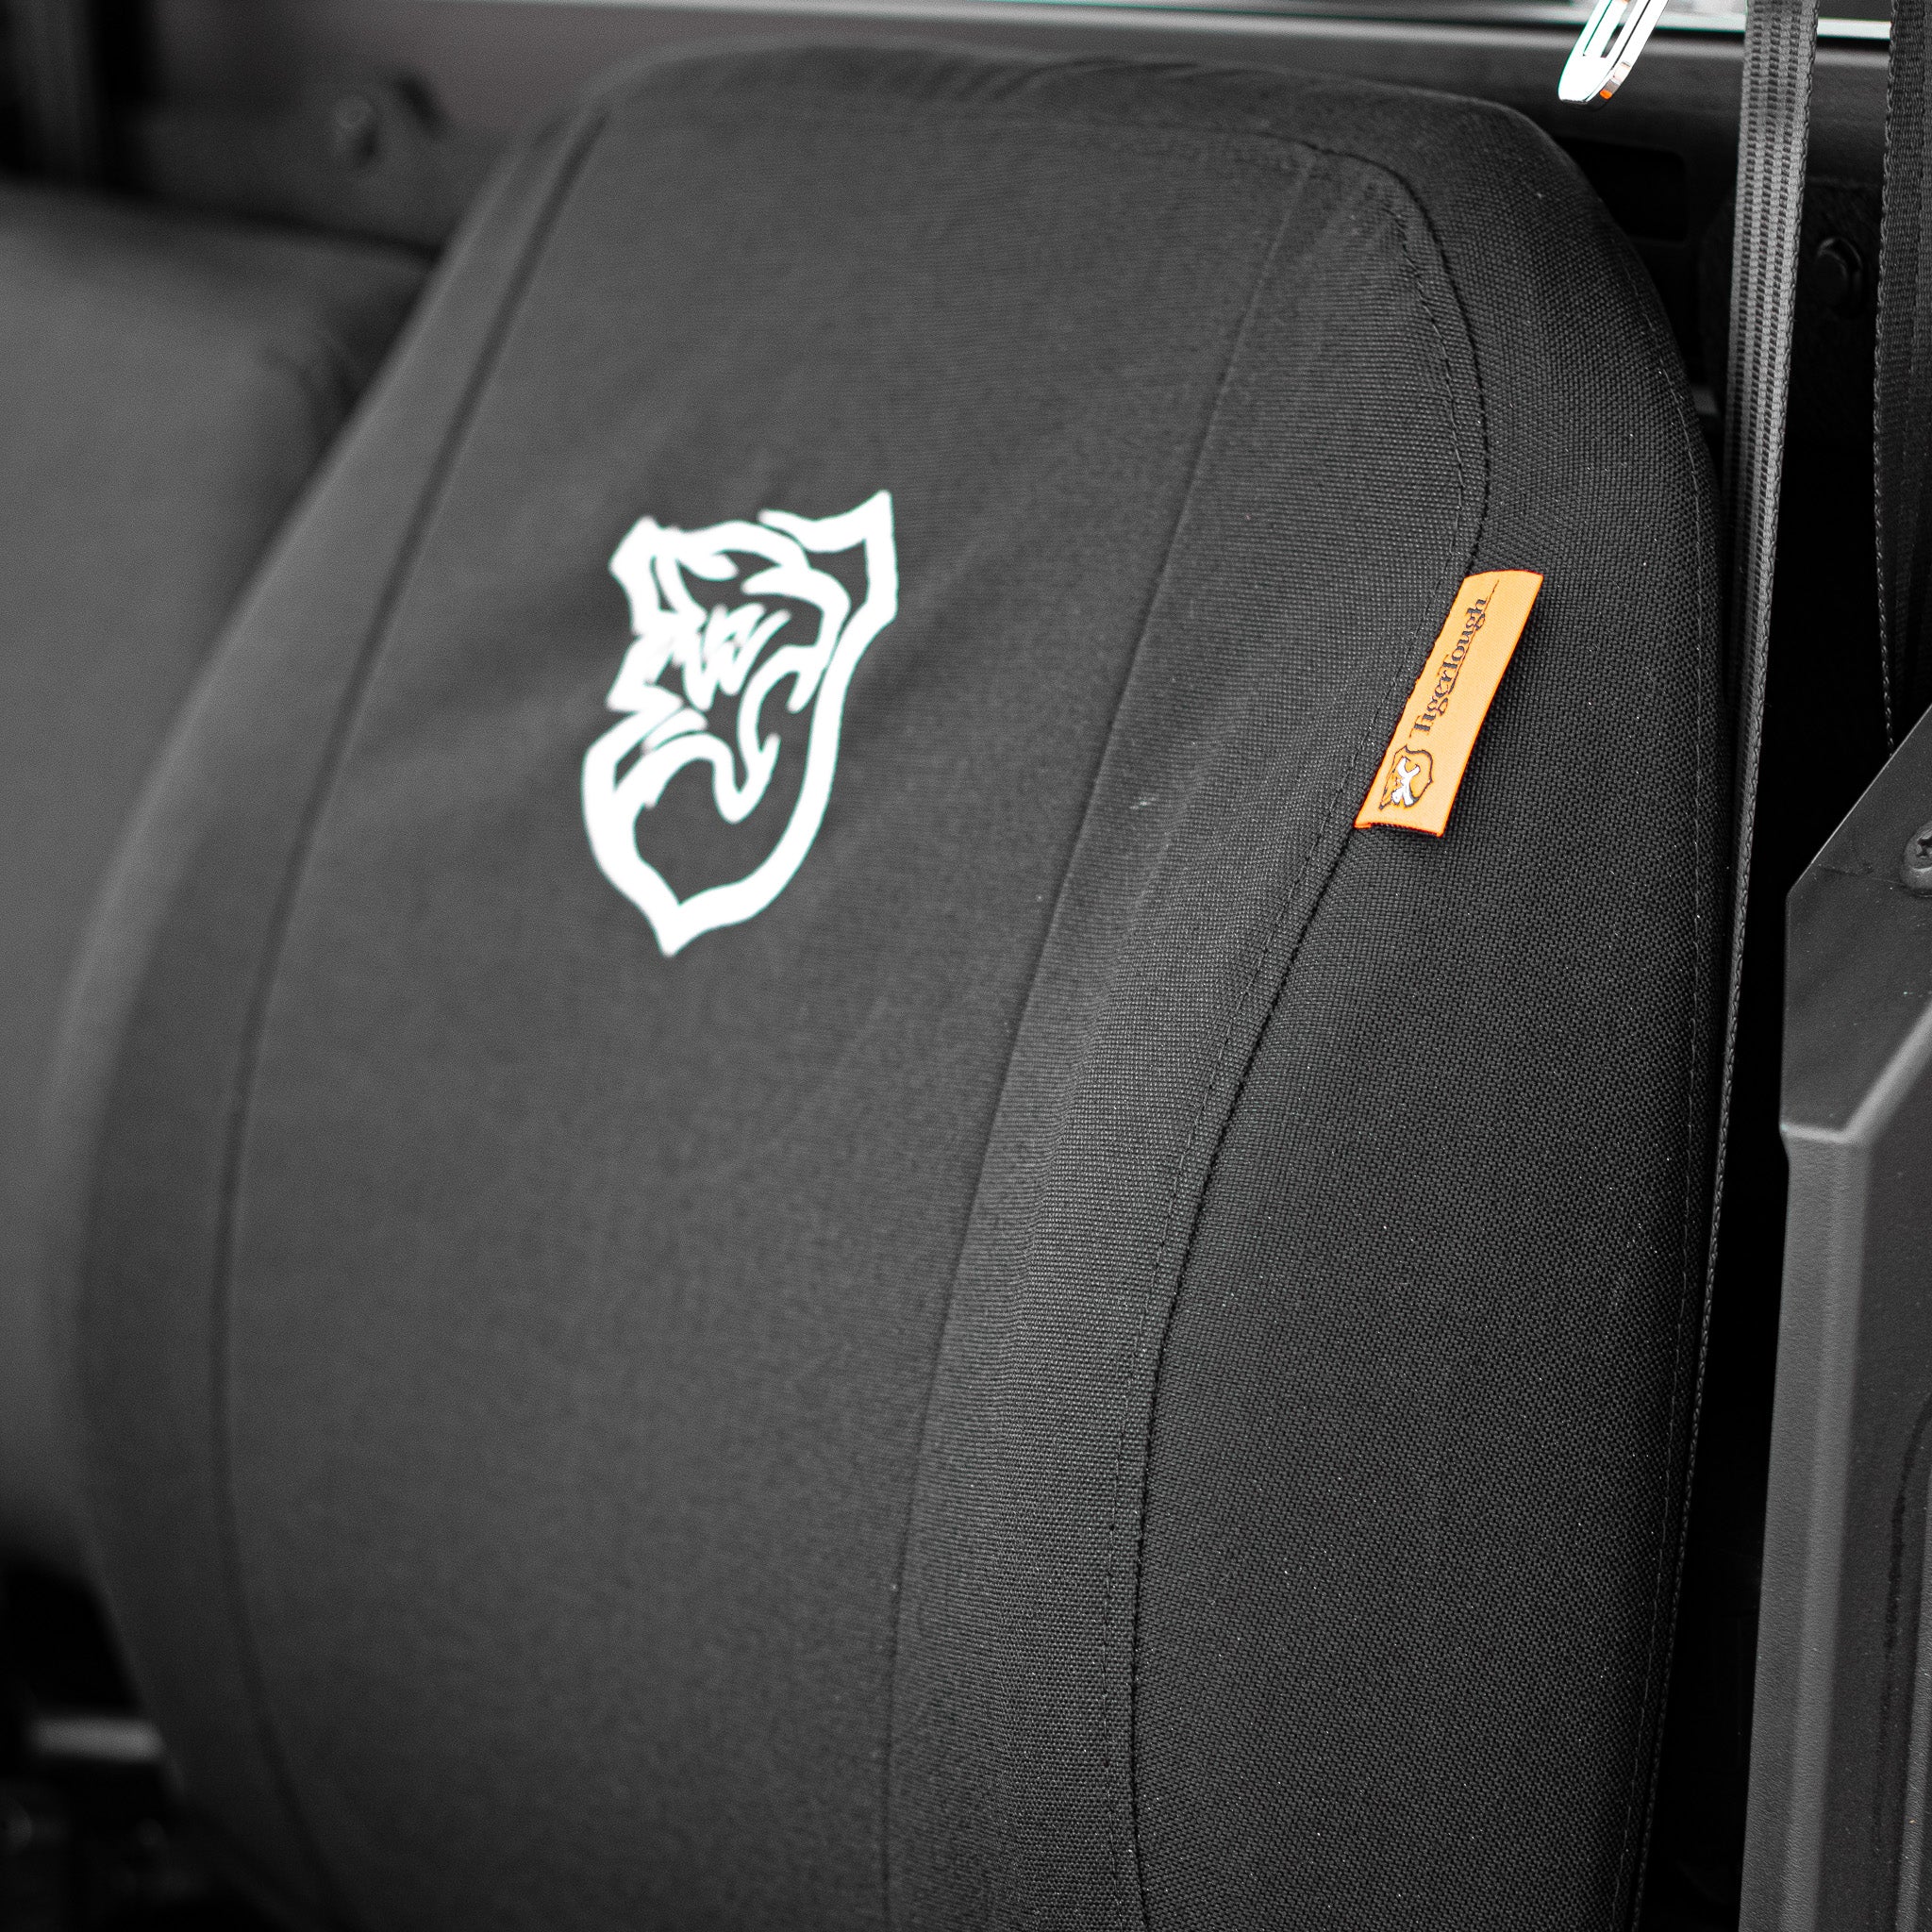 This picture shows a the TigerTough tag and the side seam on the edge of the TigerTough cover. Every set of seat covers is made in America from start to finish.